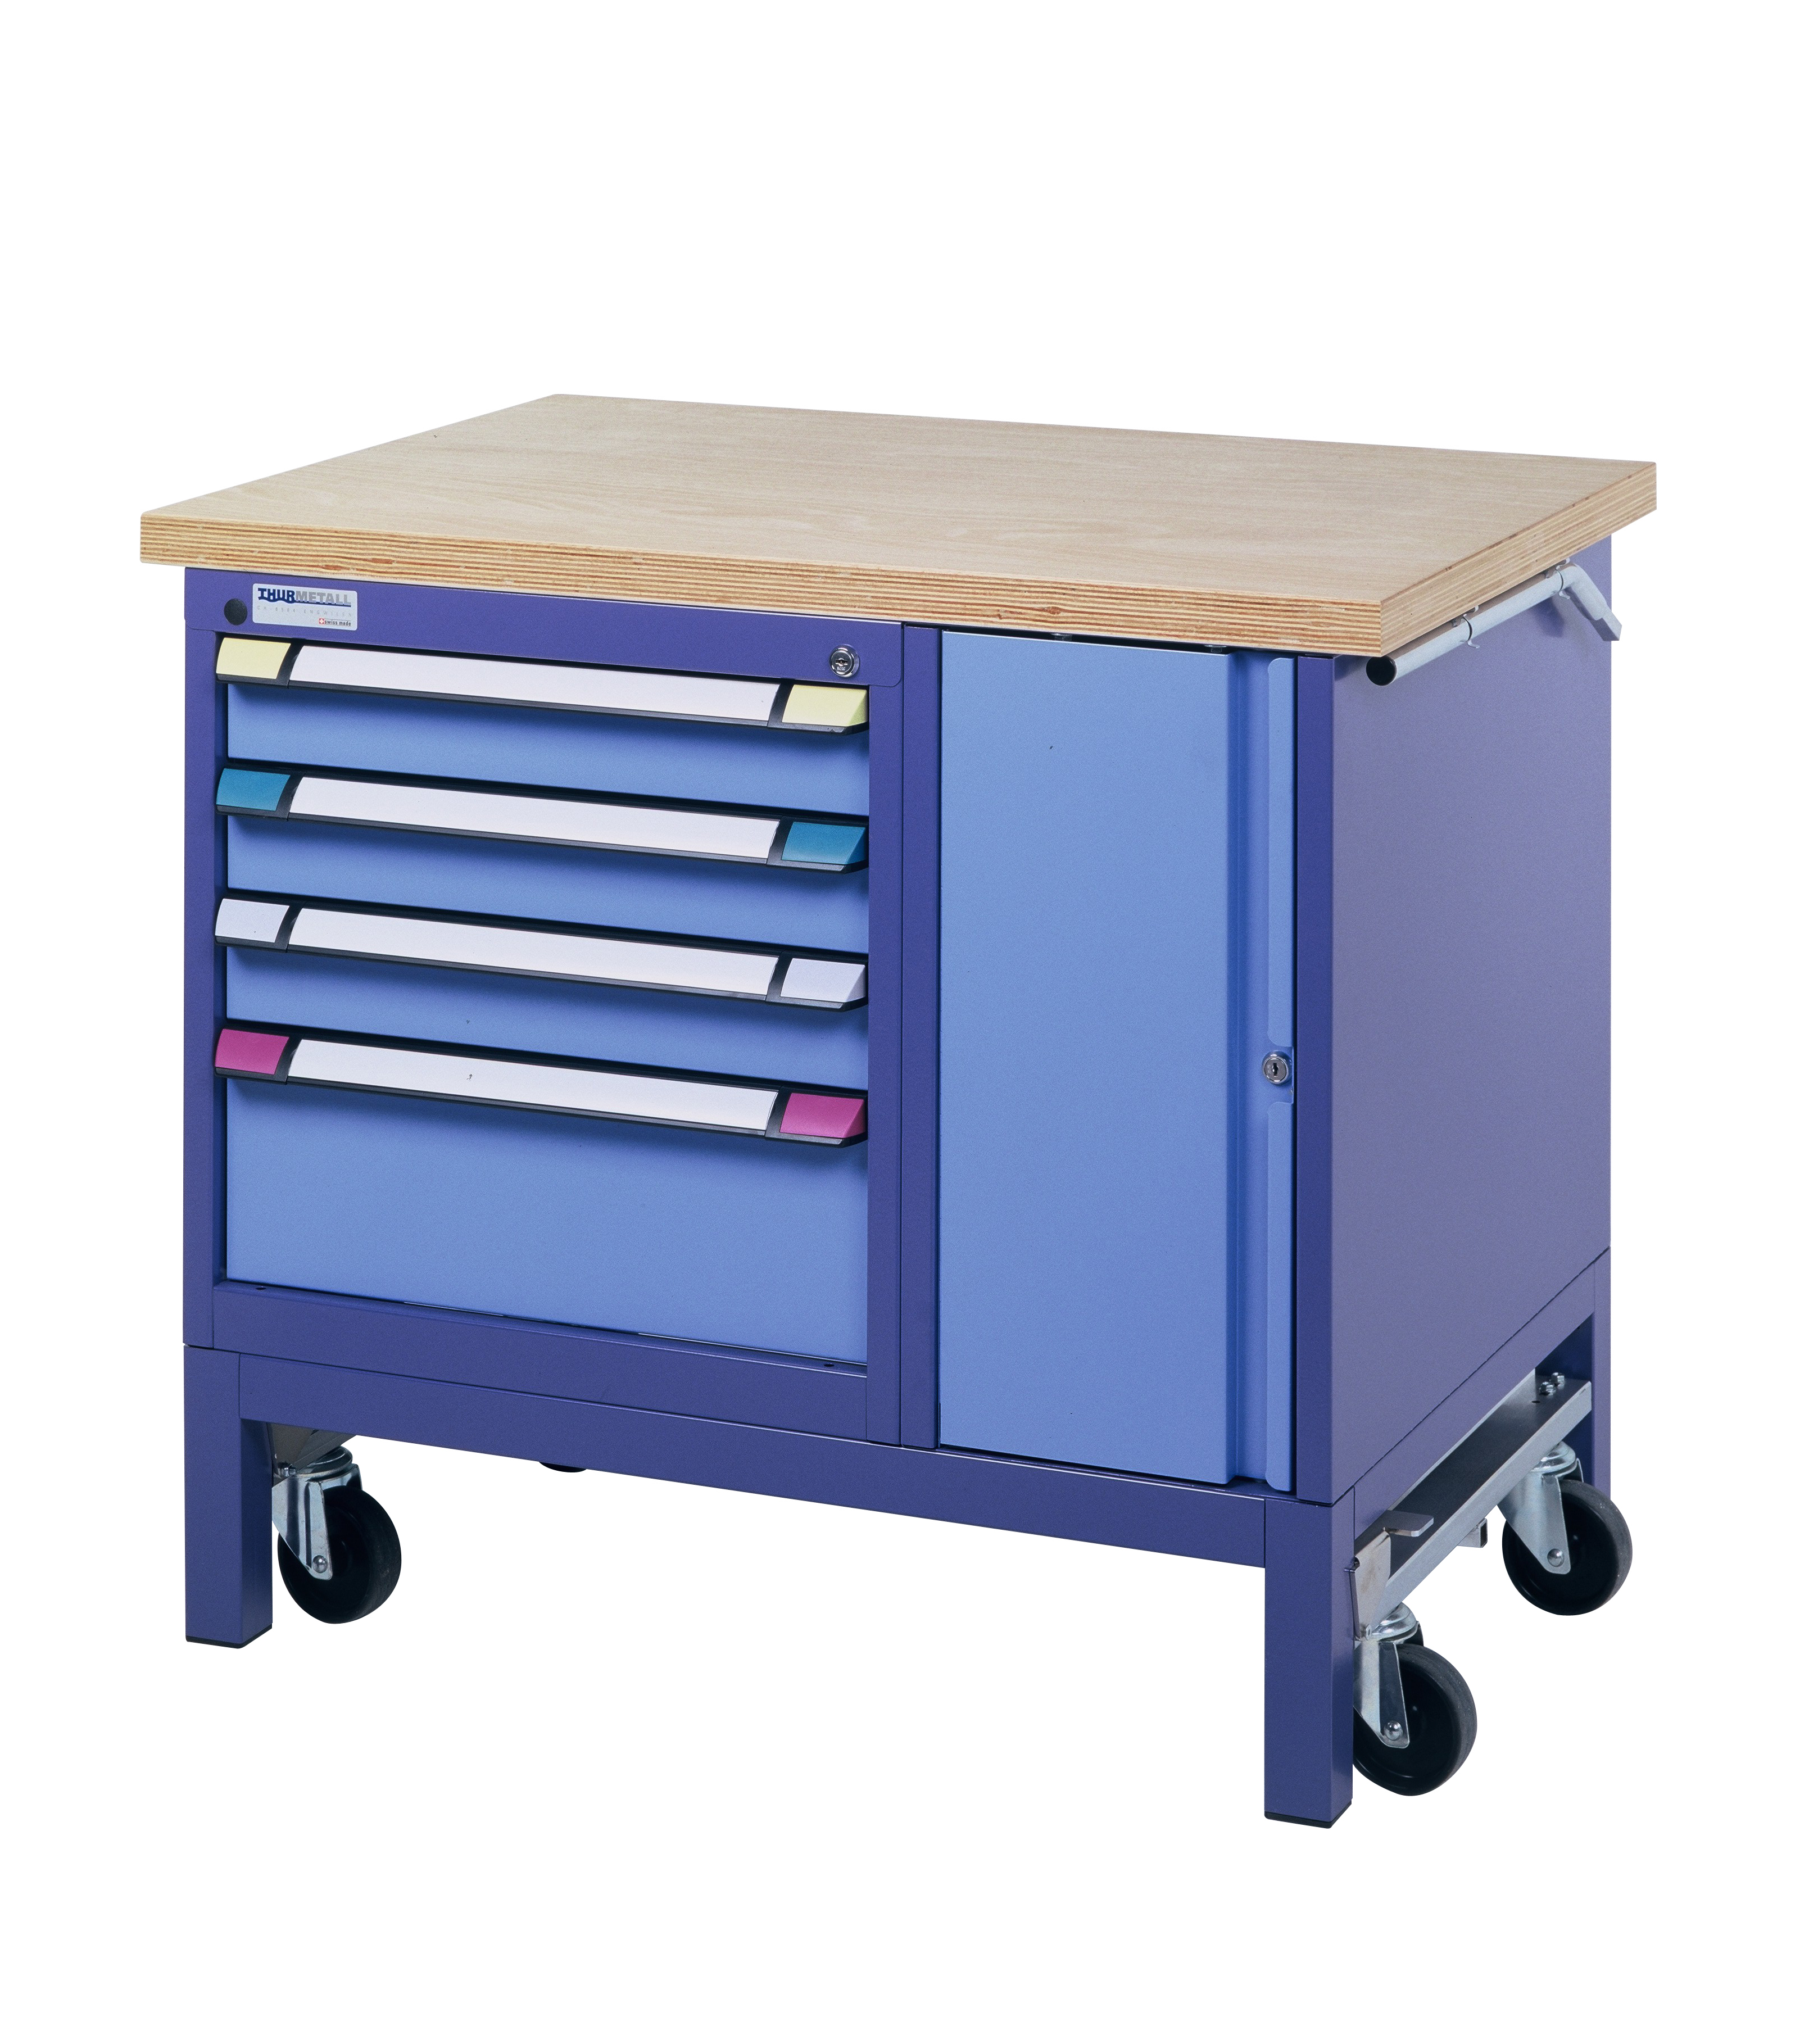 Thur Metall Mobile Workbenches